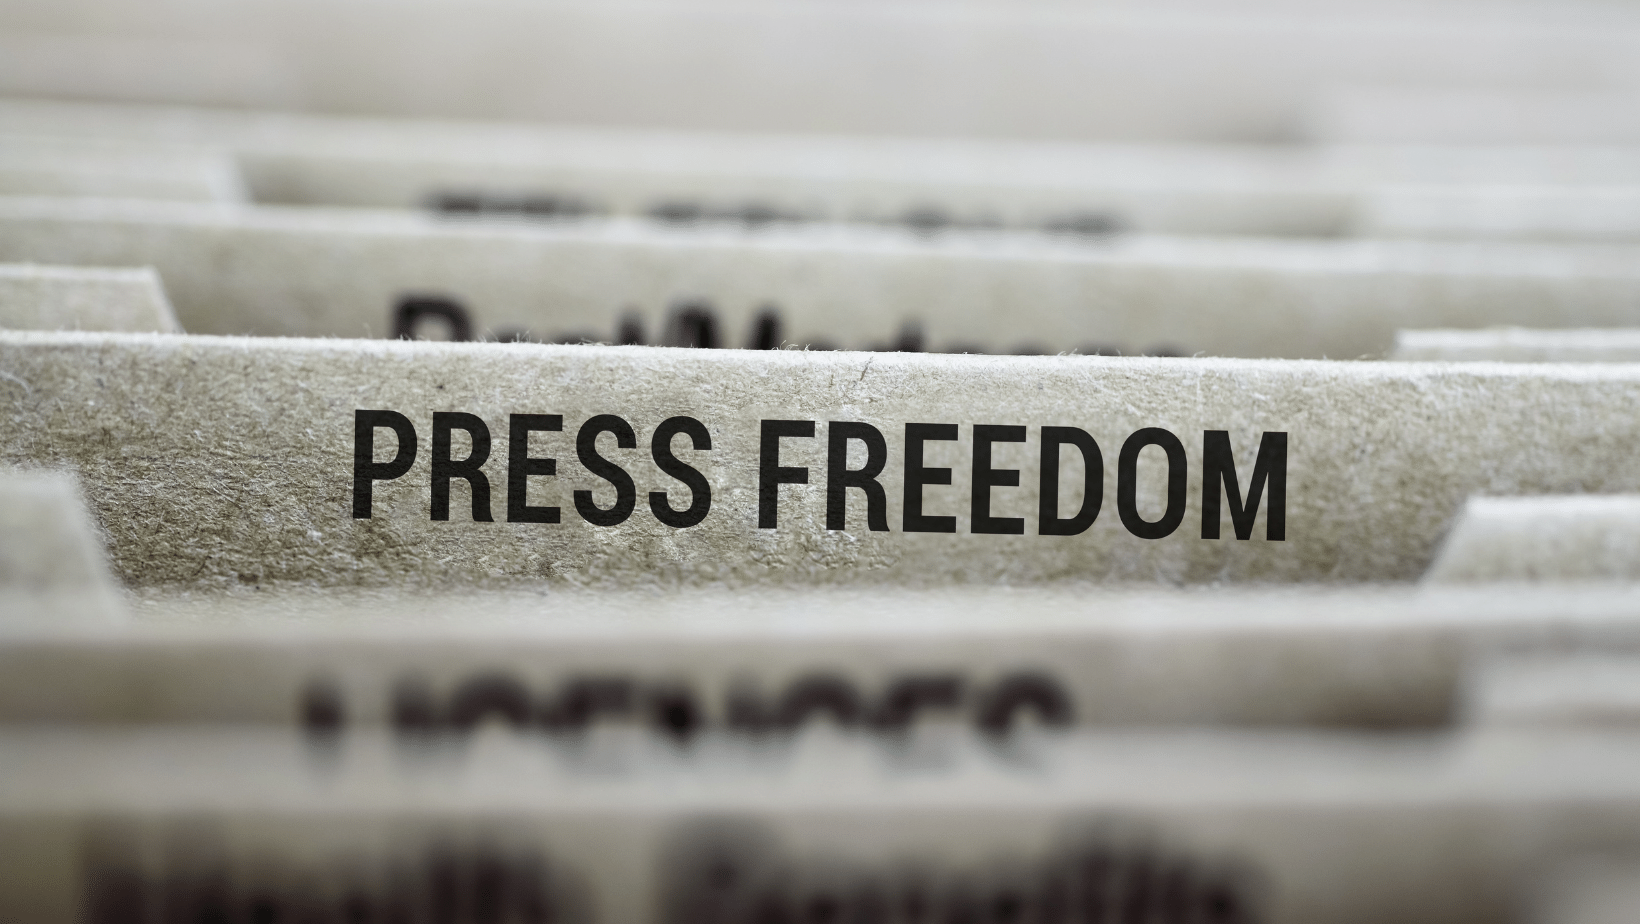 Russias Press Freedom ‘Worst Since the Cold War’